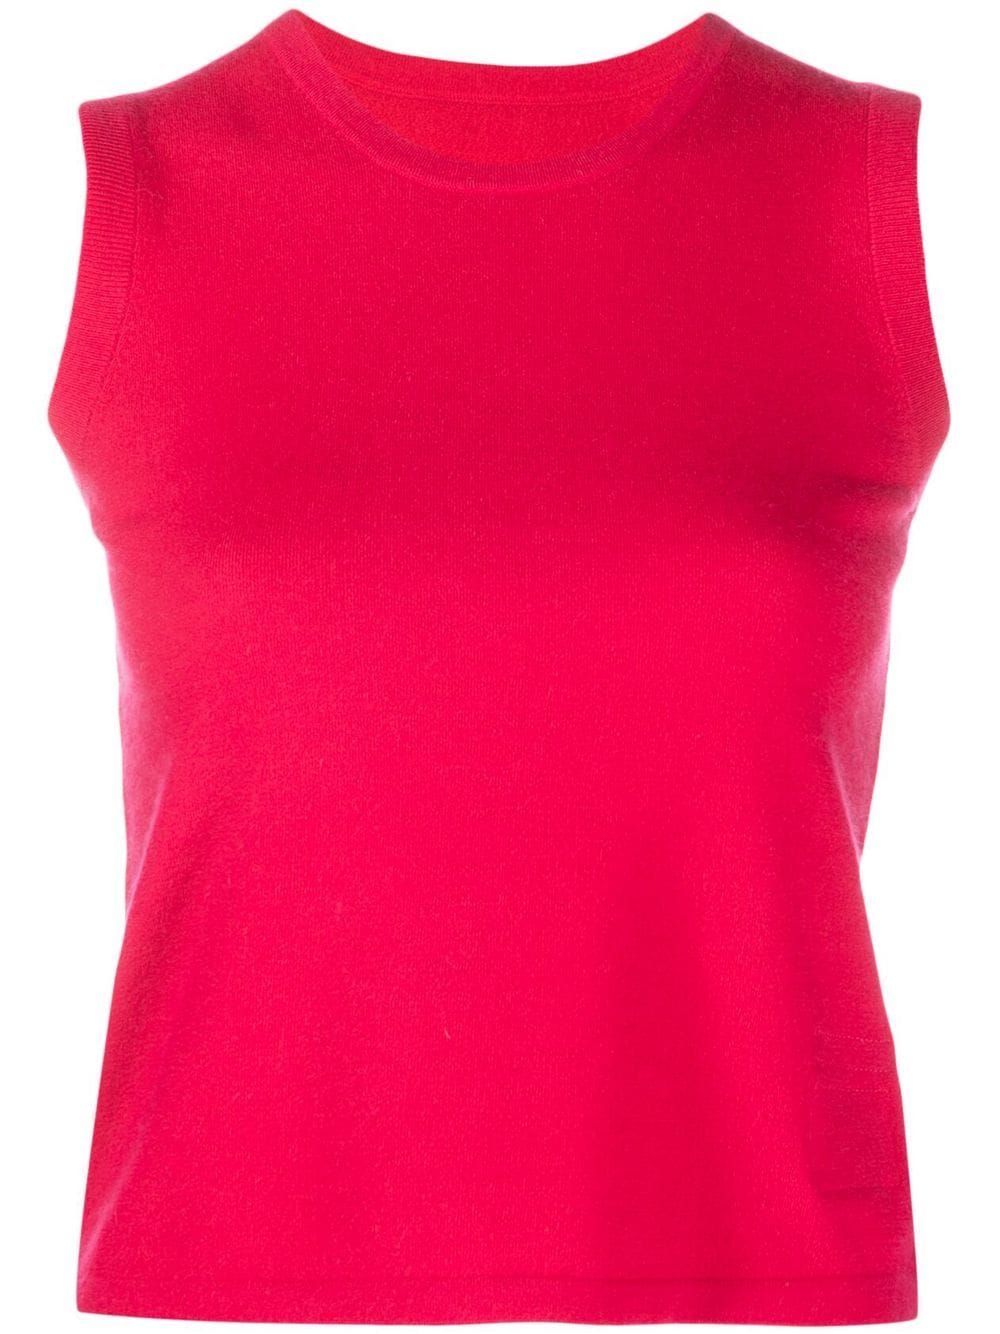 cashmere tank top